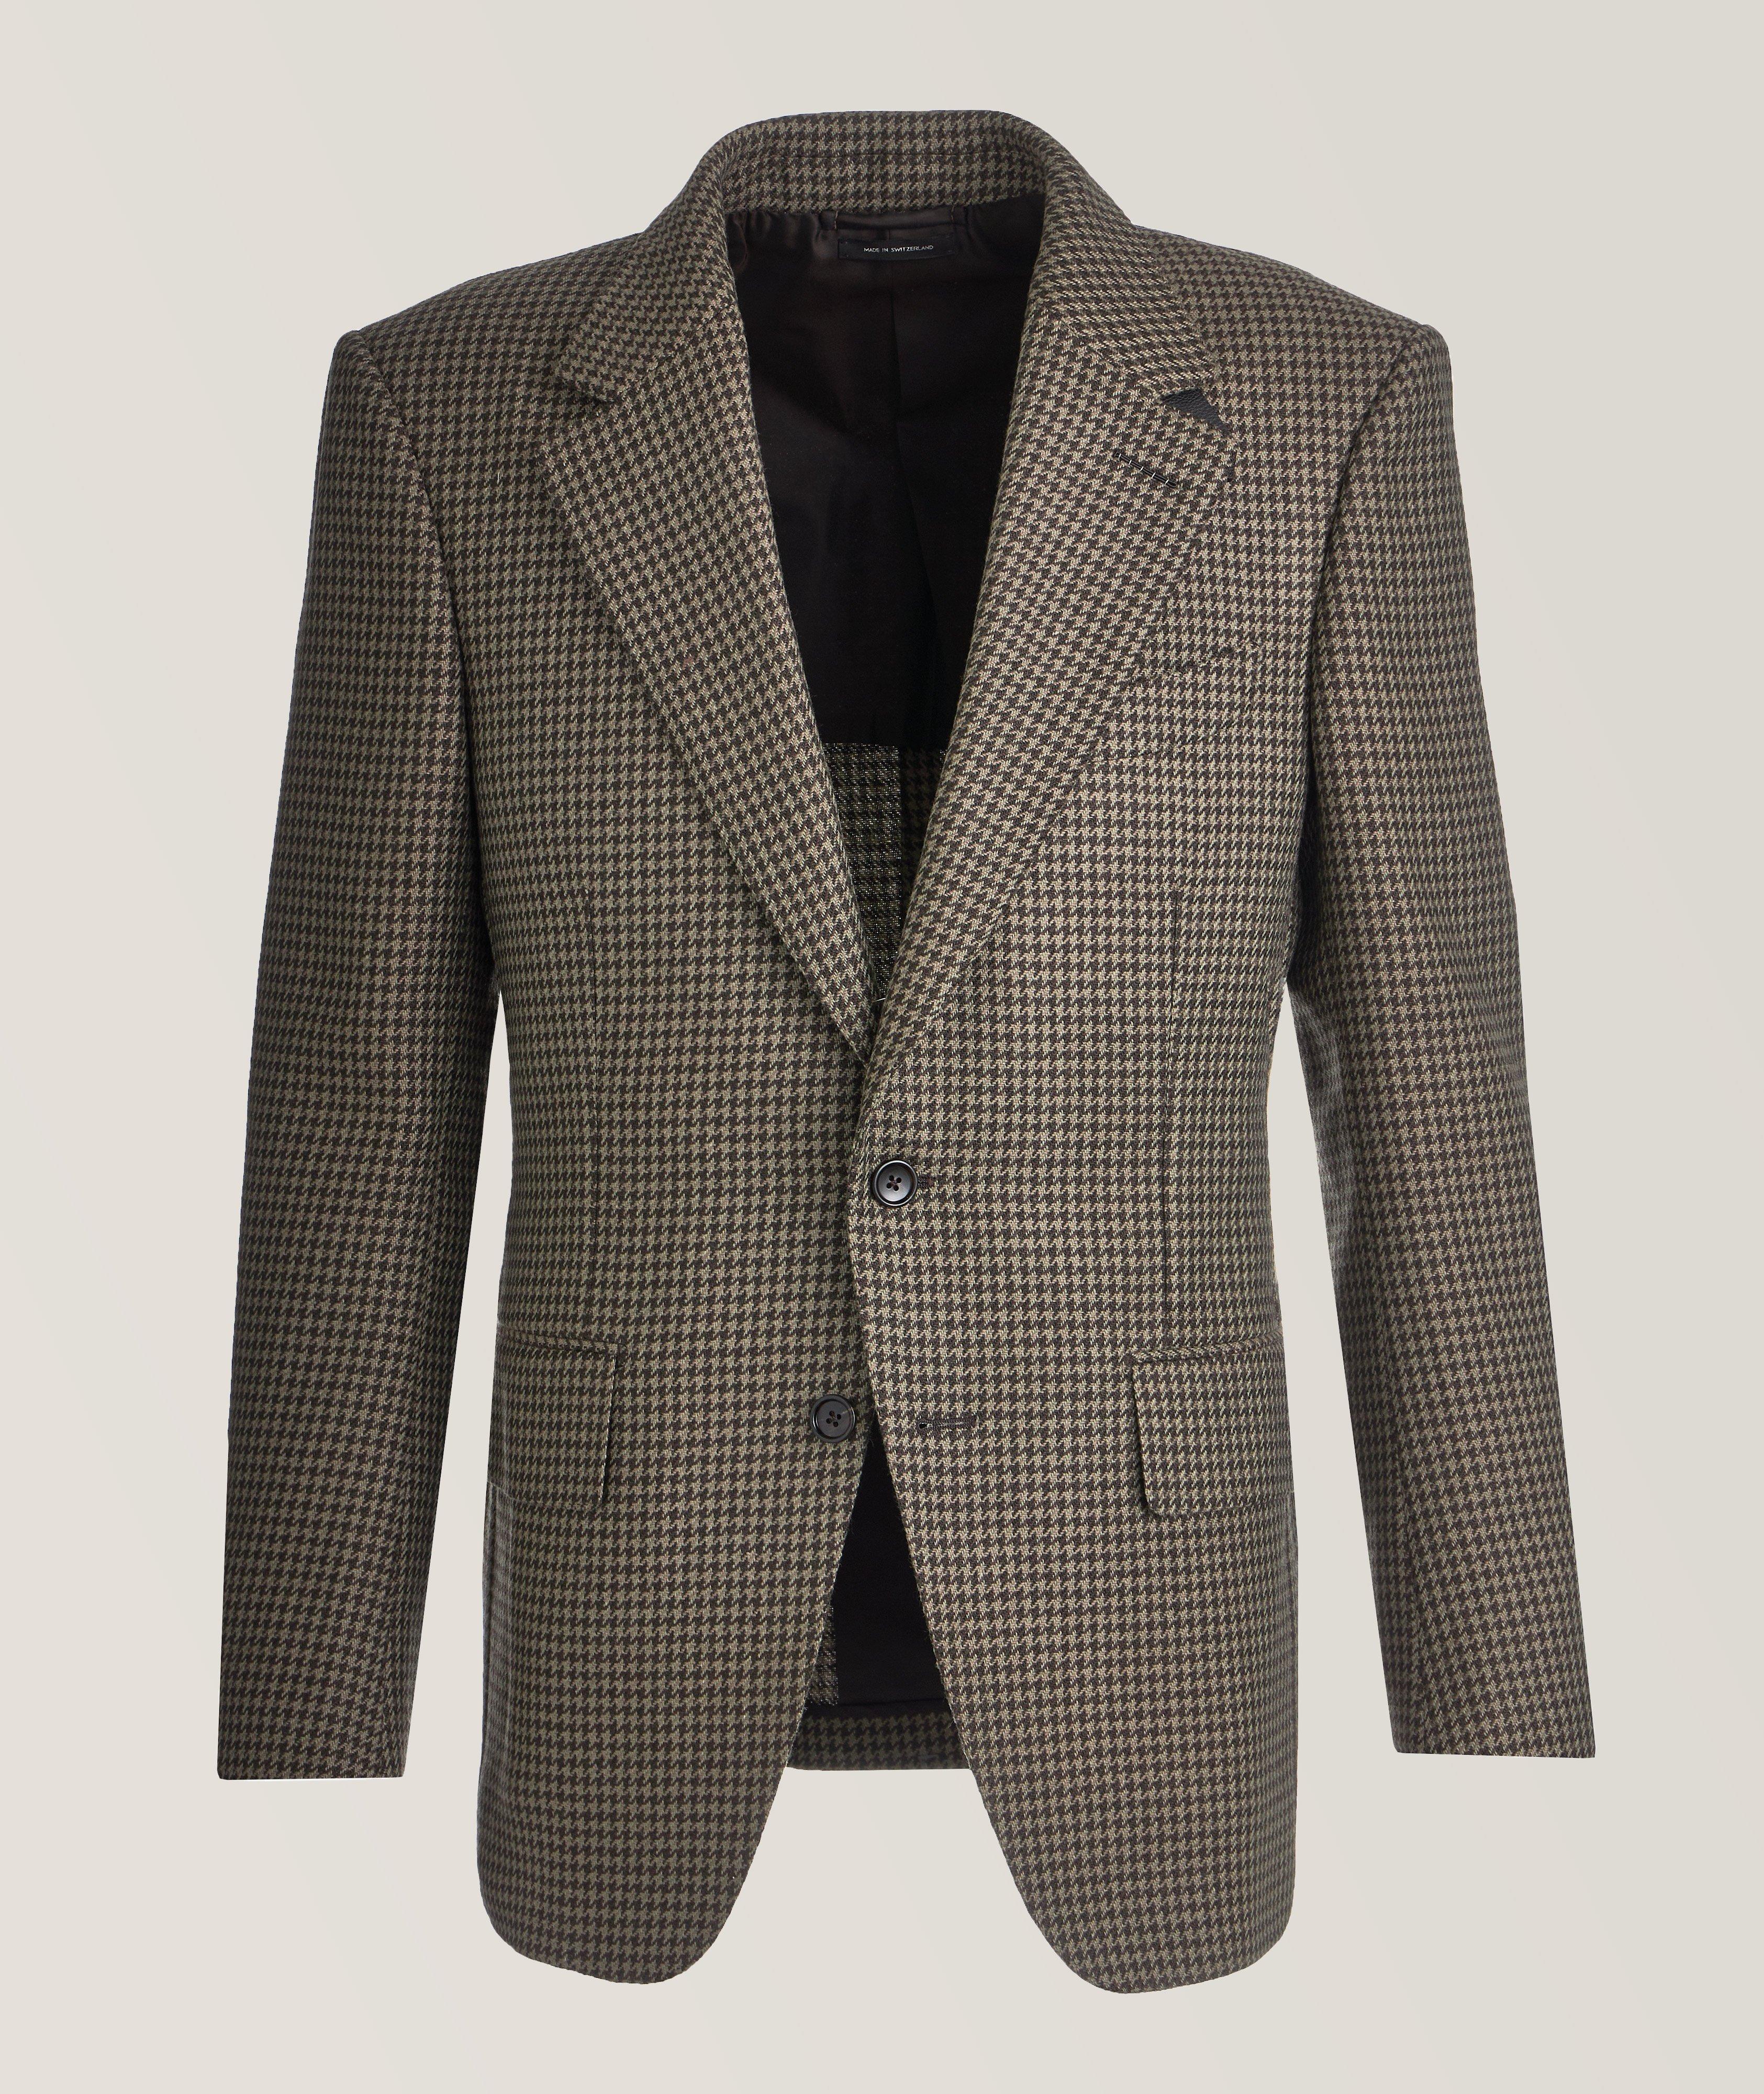 TOM FORD Atticus Houndstooth Wool, Mohair & Cashmere Sport Jacket